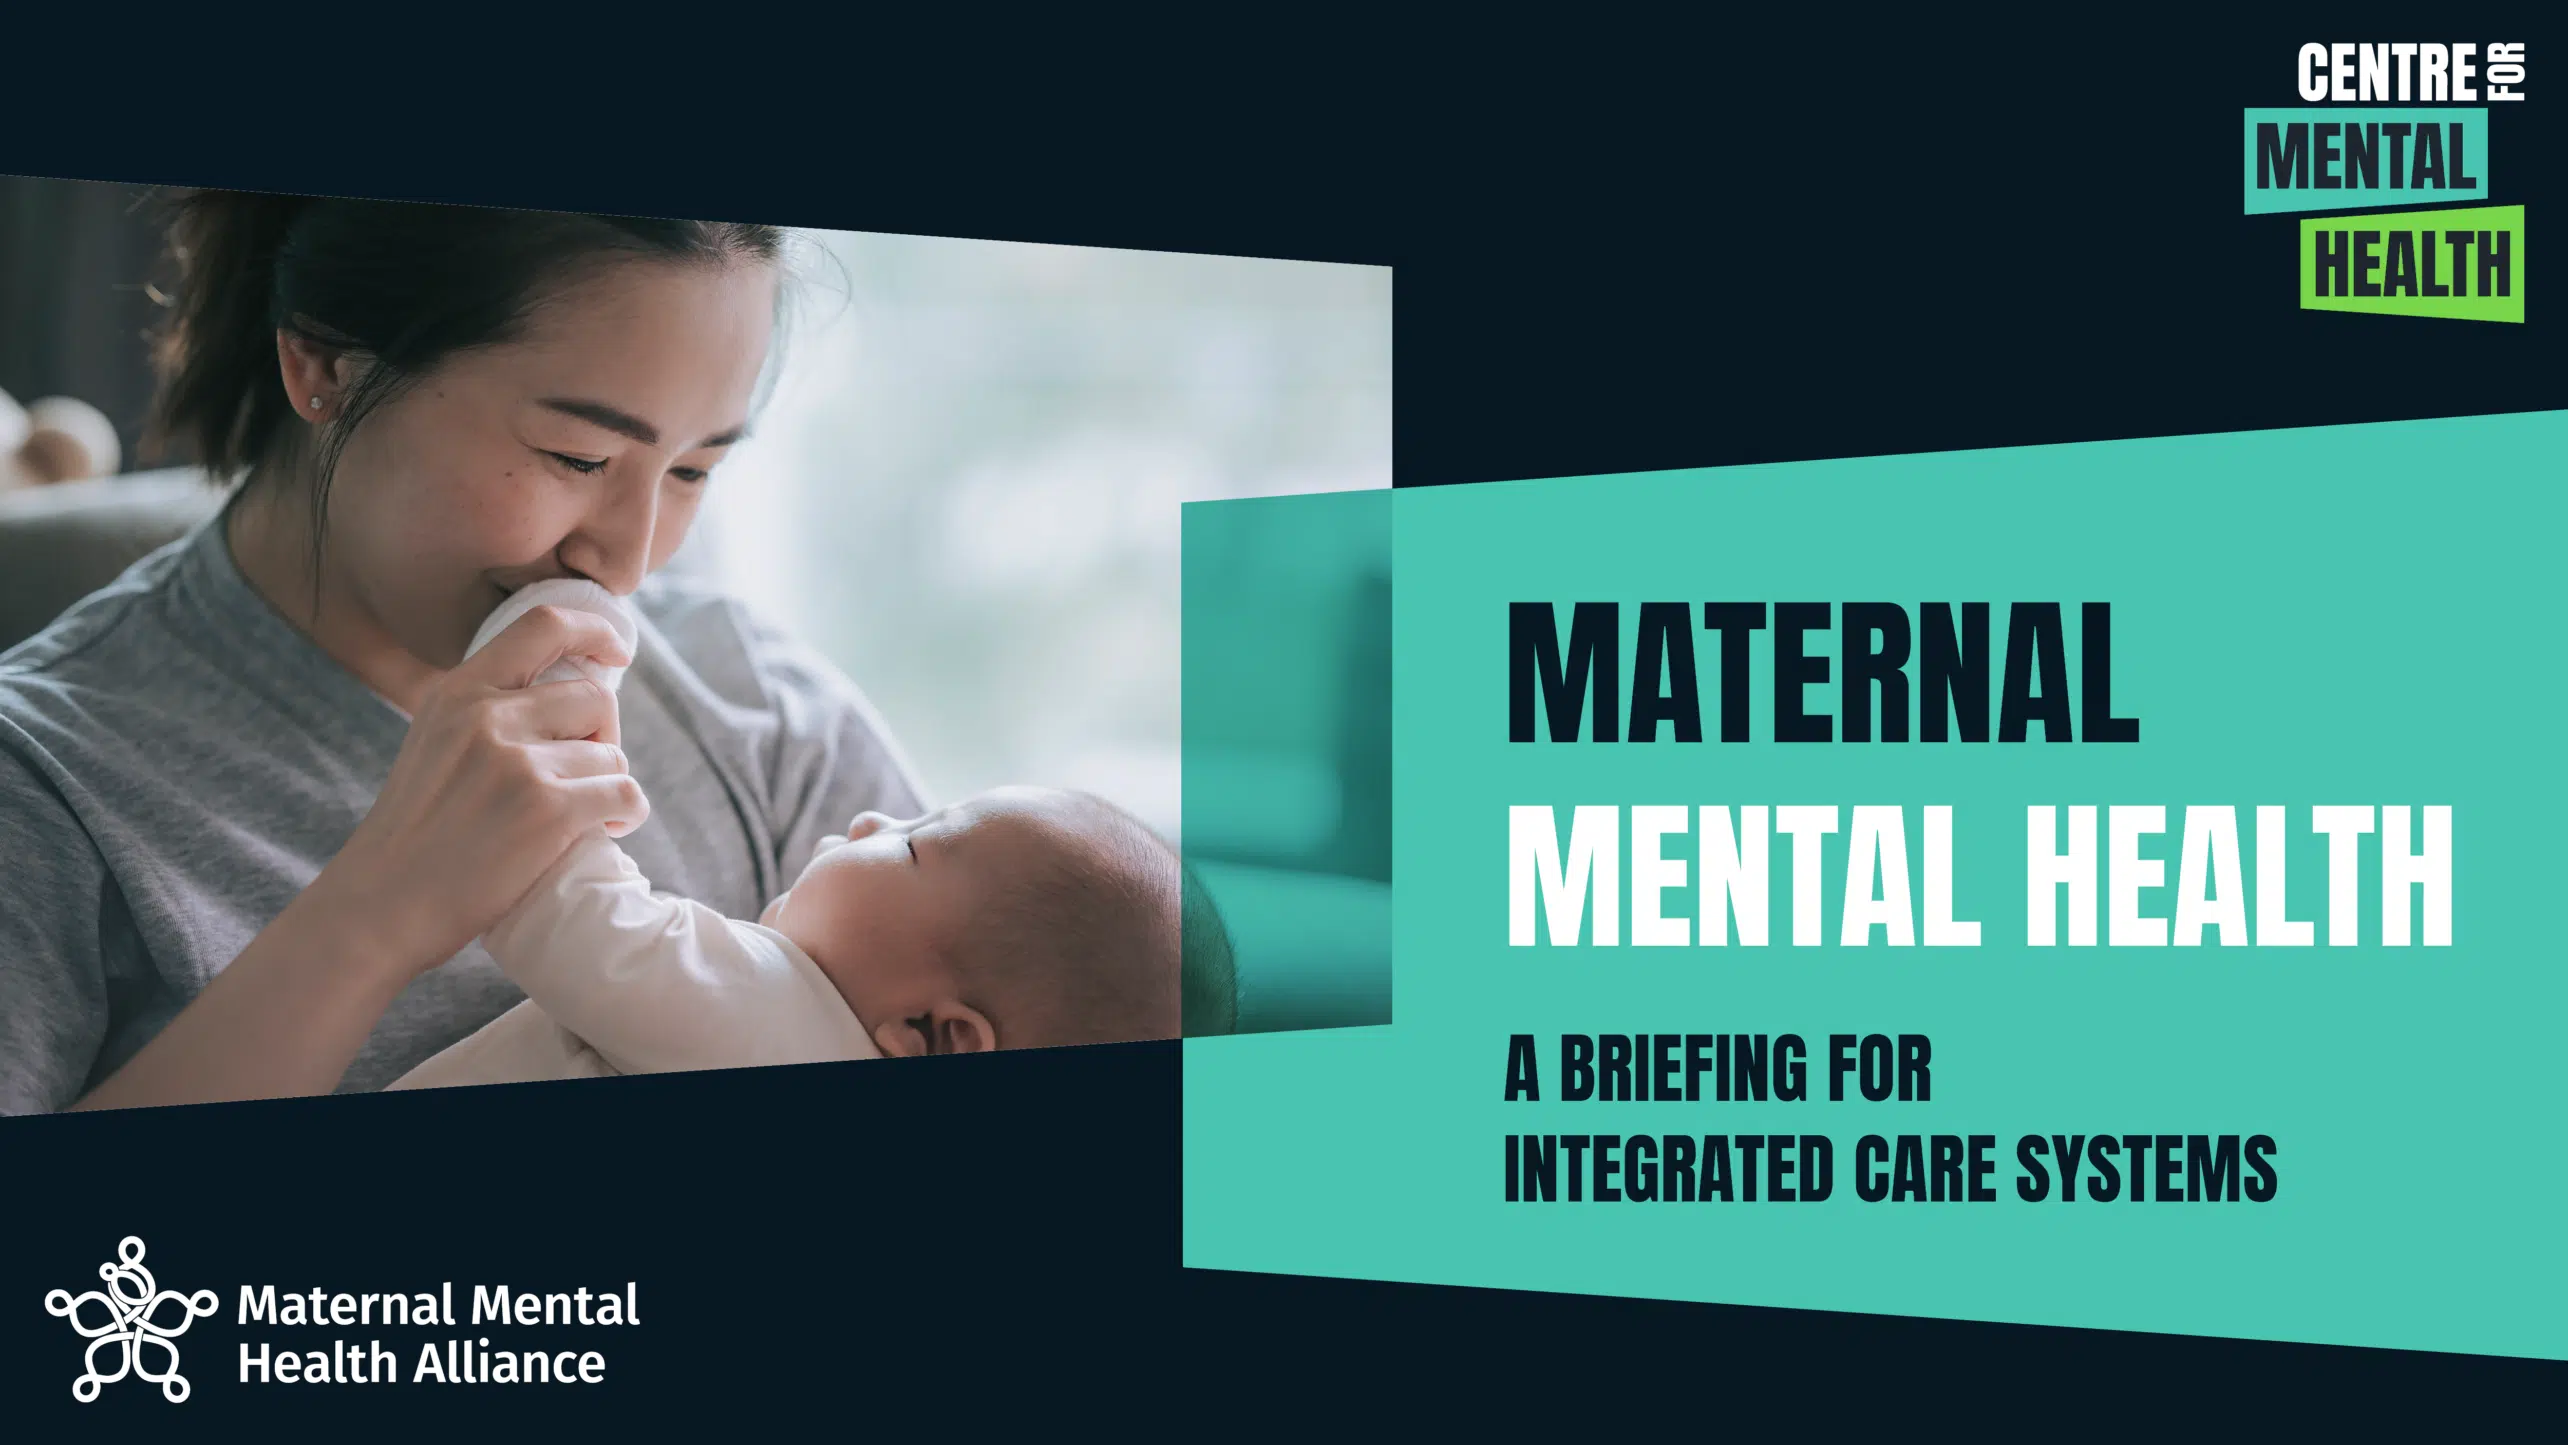 Maternal Mental Health Alliance launches briefing to support Integrated ...